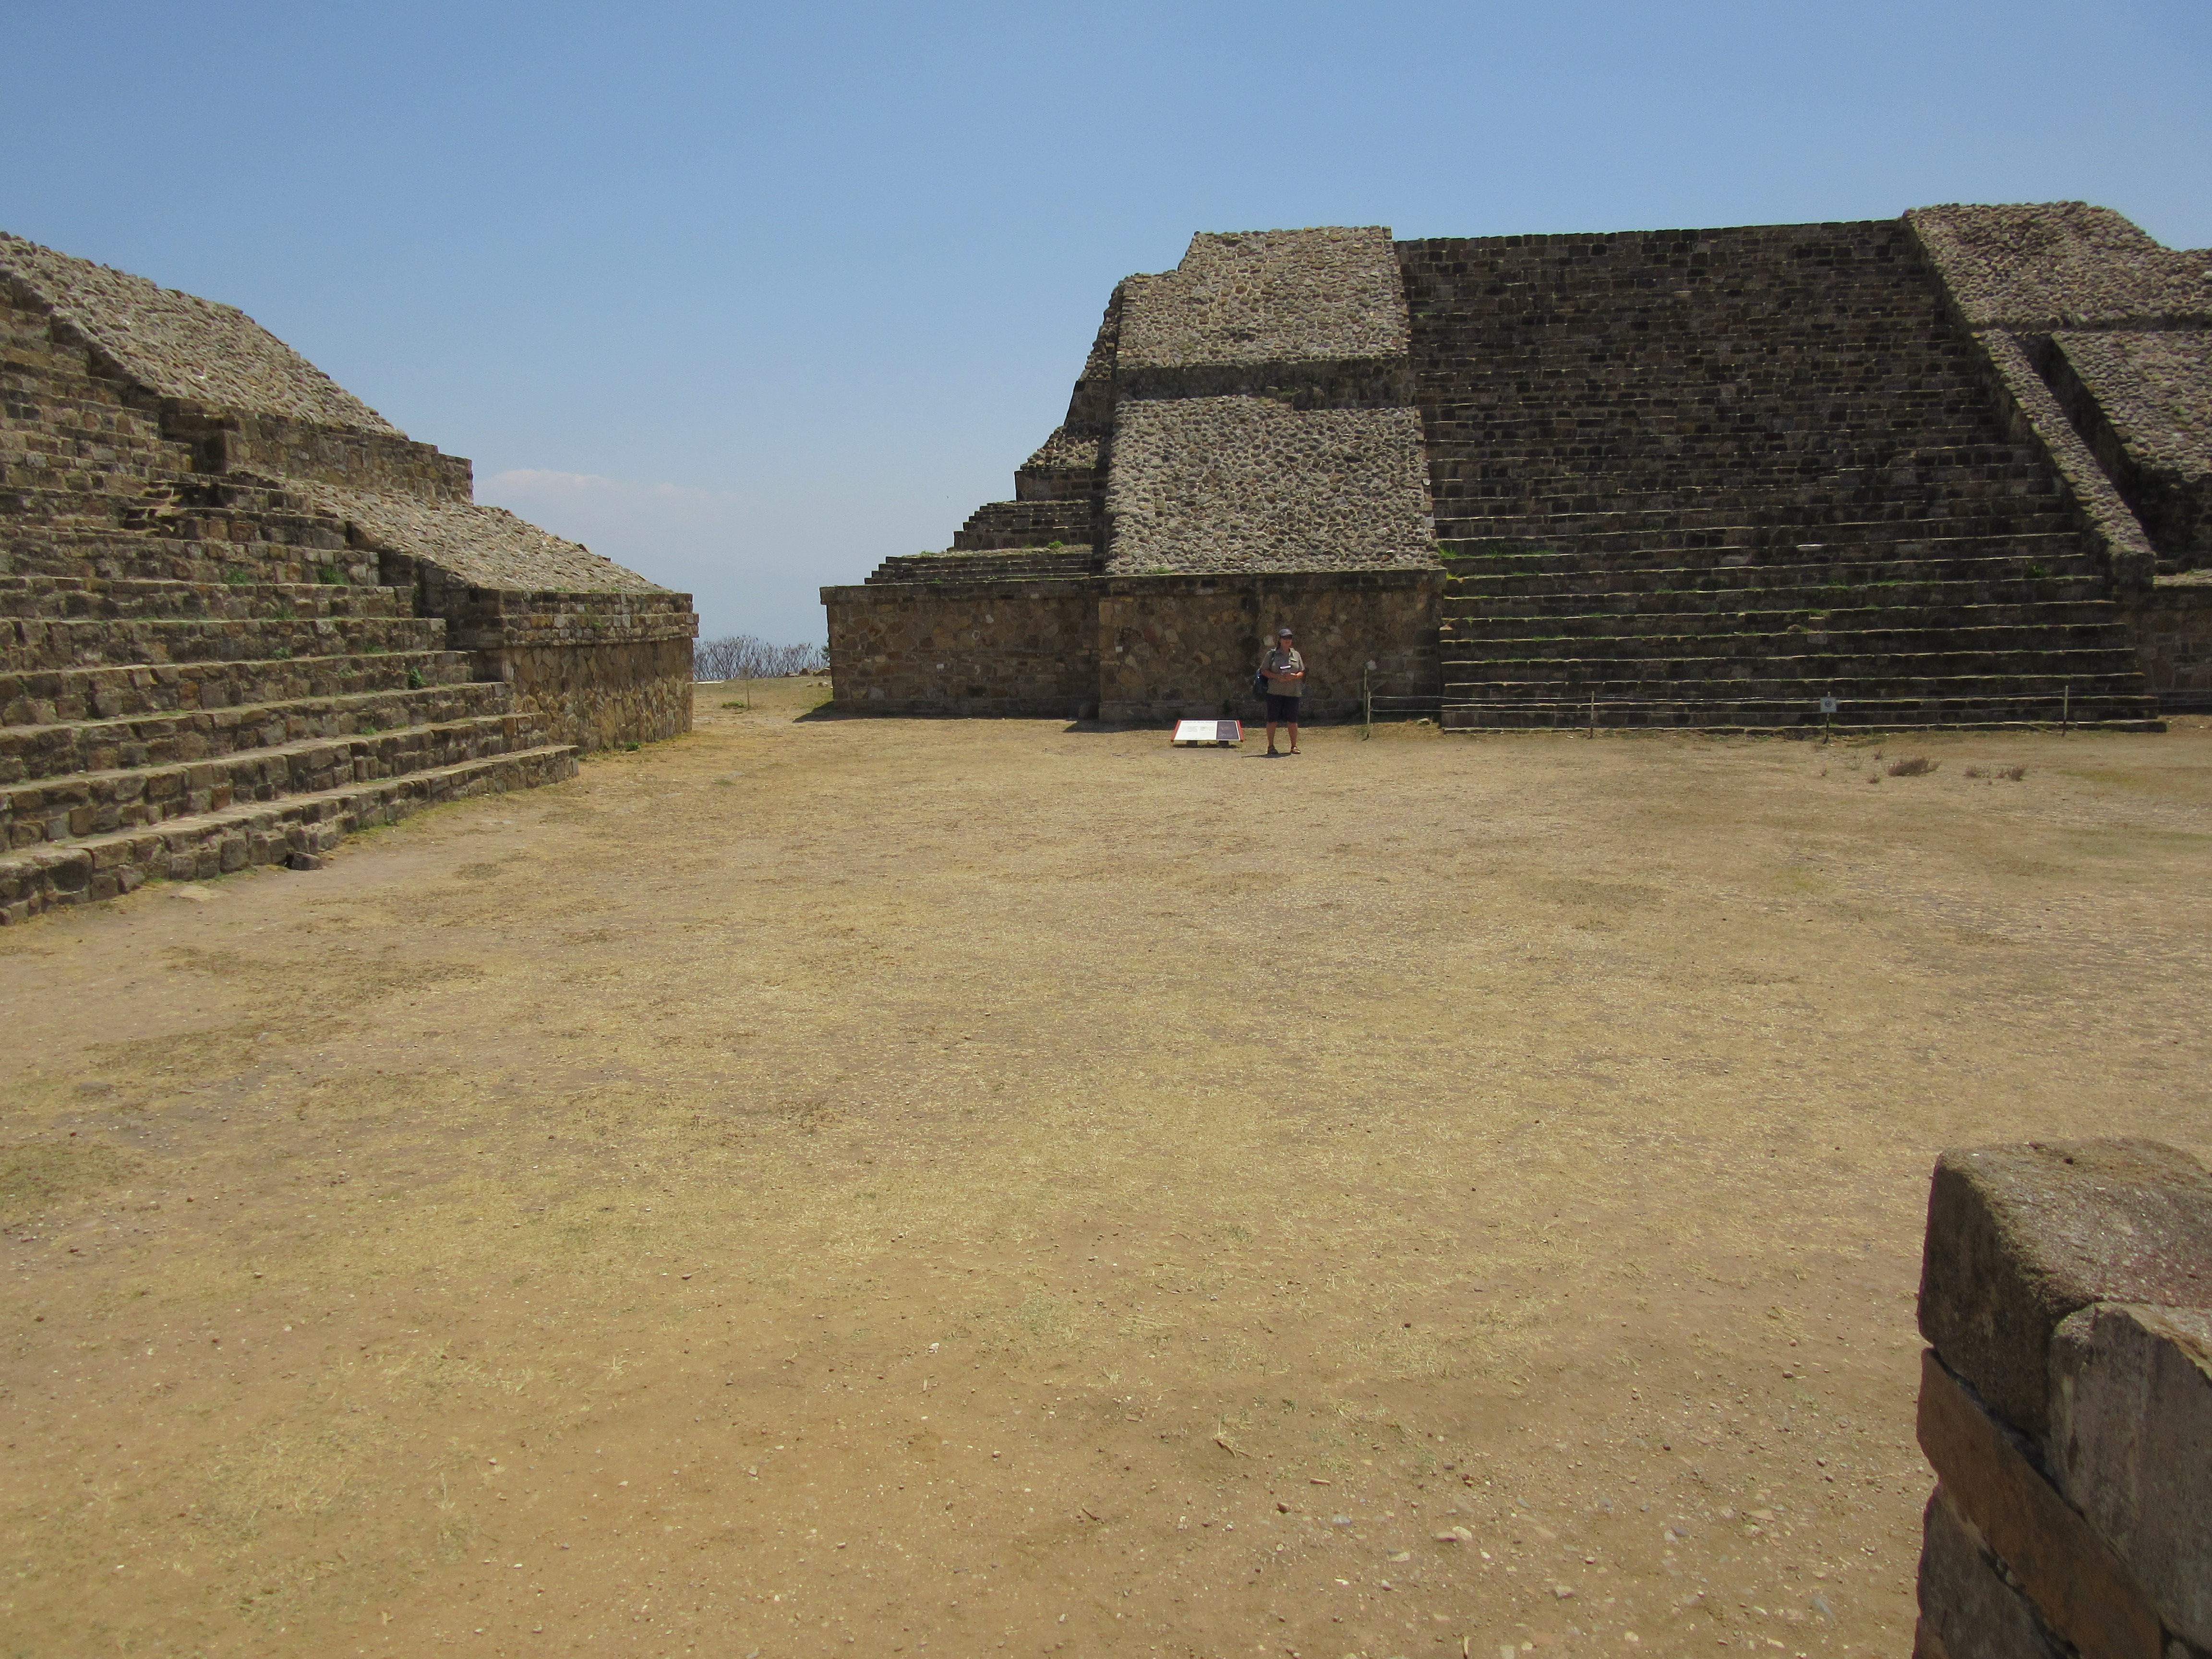 Monte Alban - Zapotec archaeological site